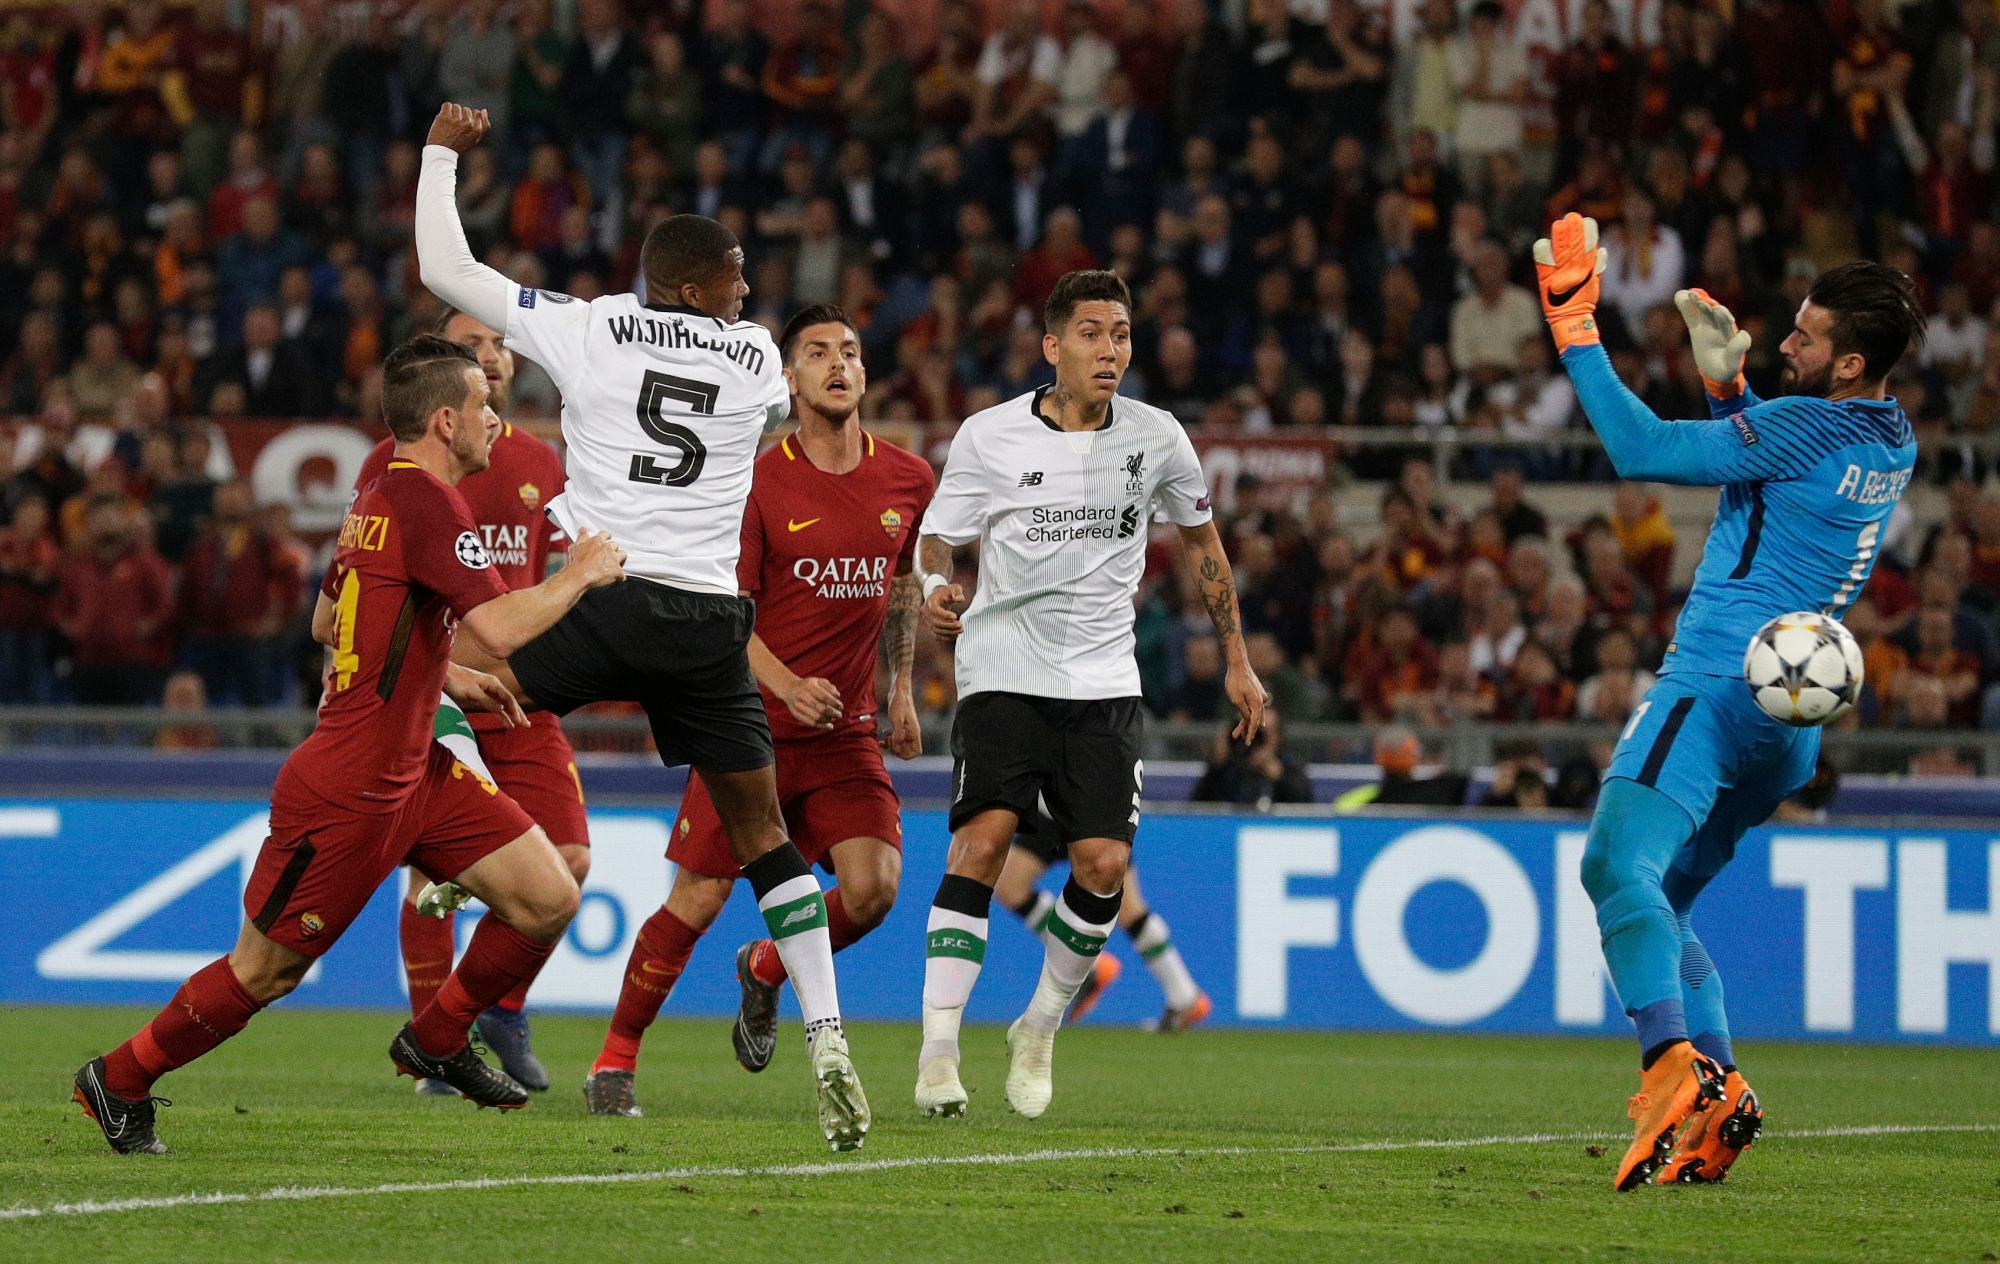 Liverpool's Georginio Wijnaldum scores his side's second goal during the Champions League semifinal second leg soccer match between Roma and Liverpool at the Olympic Stadium in Rome, Wednesday, May 2, 2018. (AP Photo/Andrew Medichini) Italy Soccer Champions League